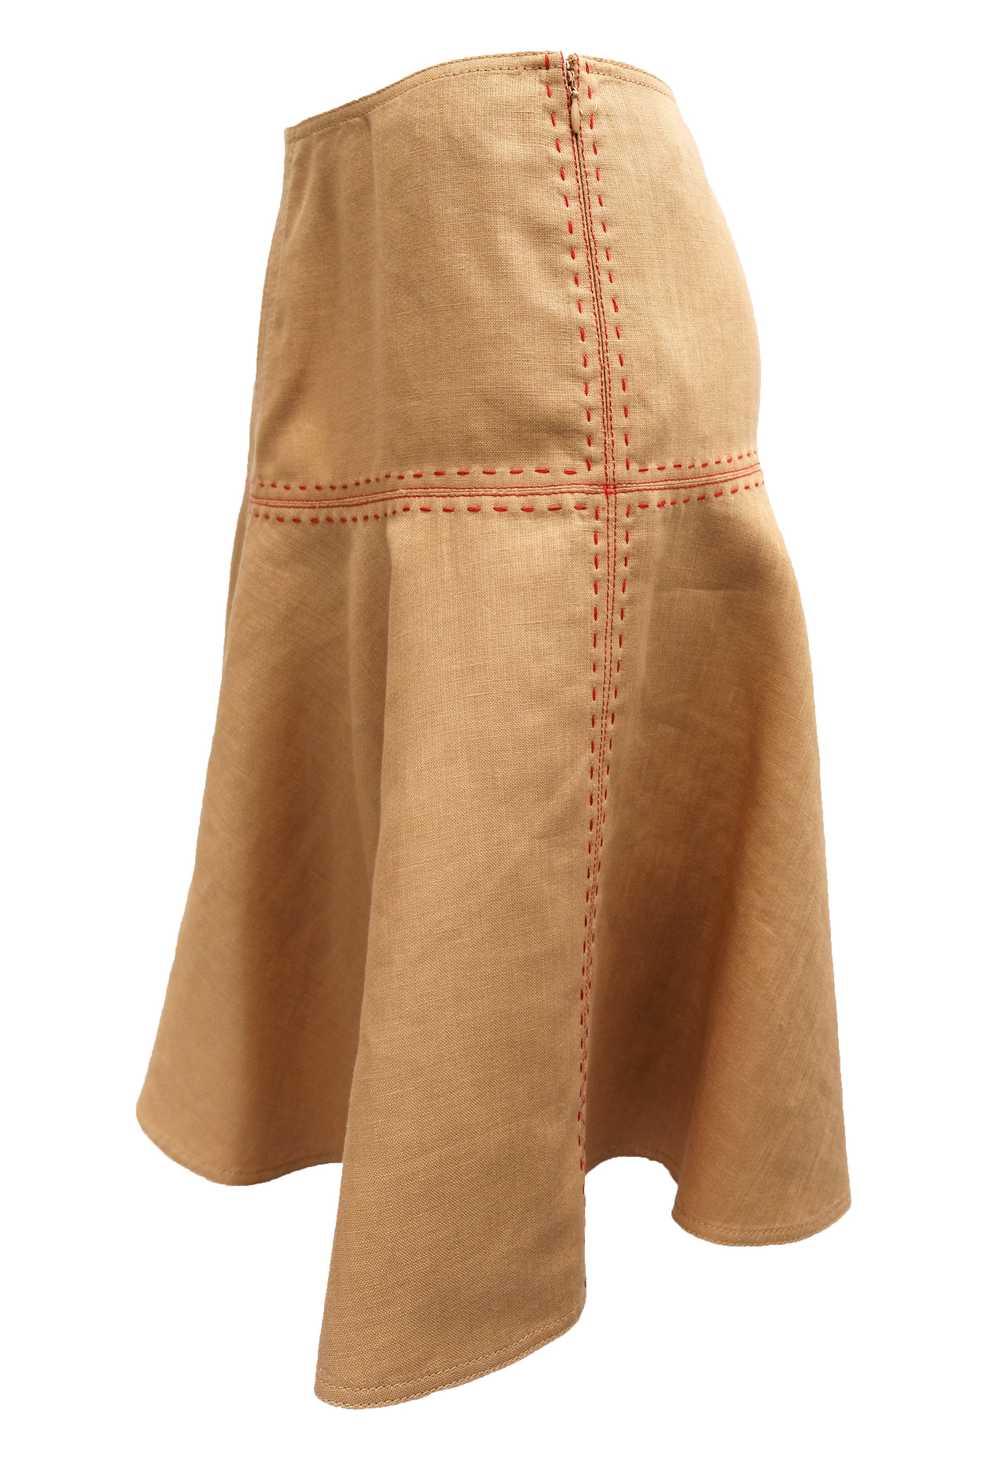 Anne Klein Skater Skirt in Tan Linen with Red Ove… - image 3